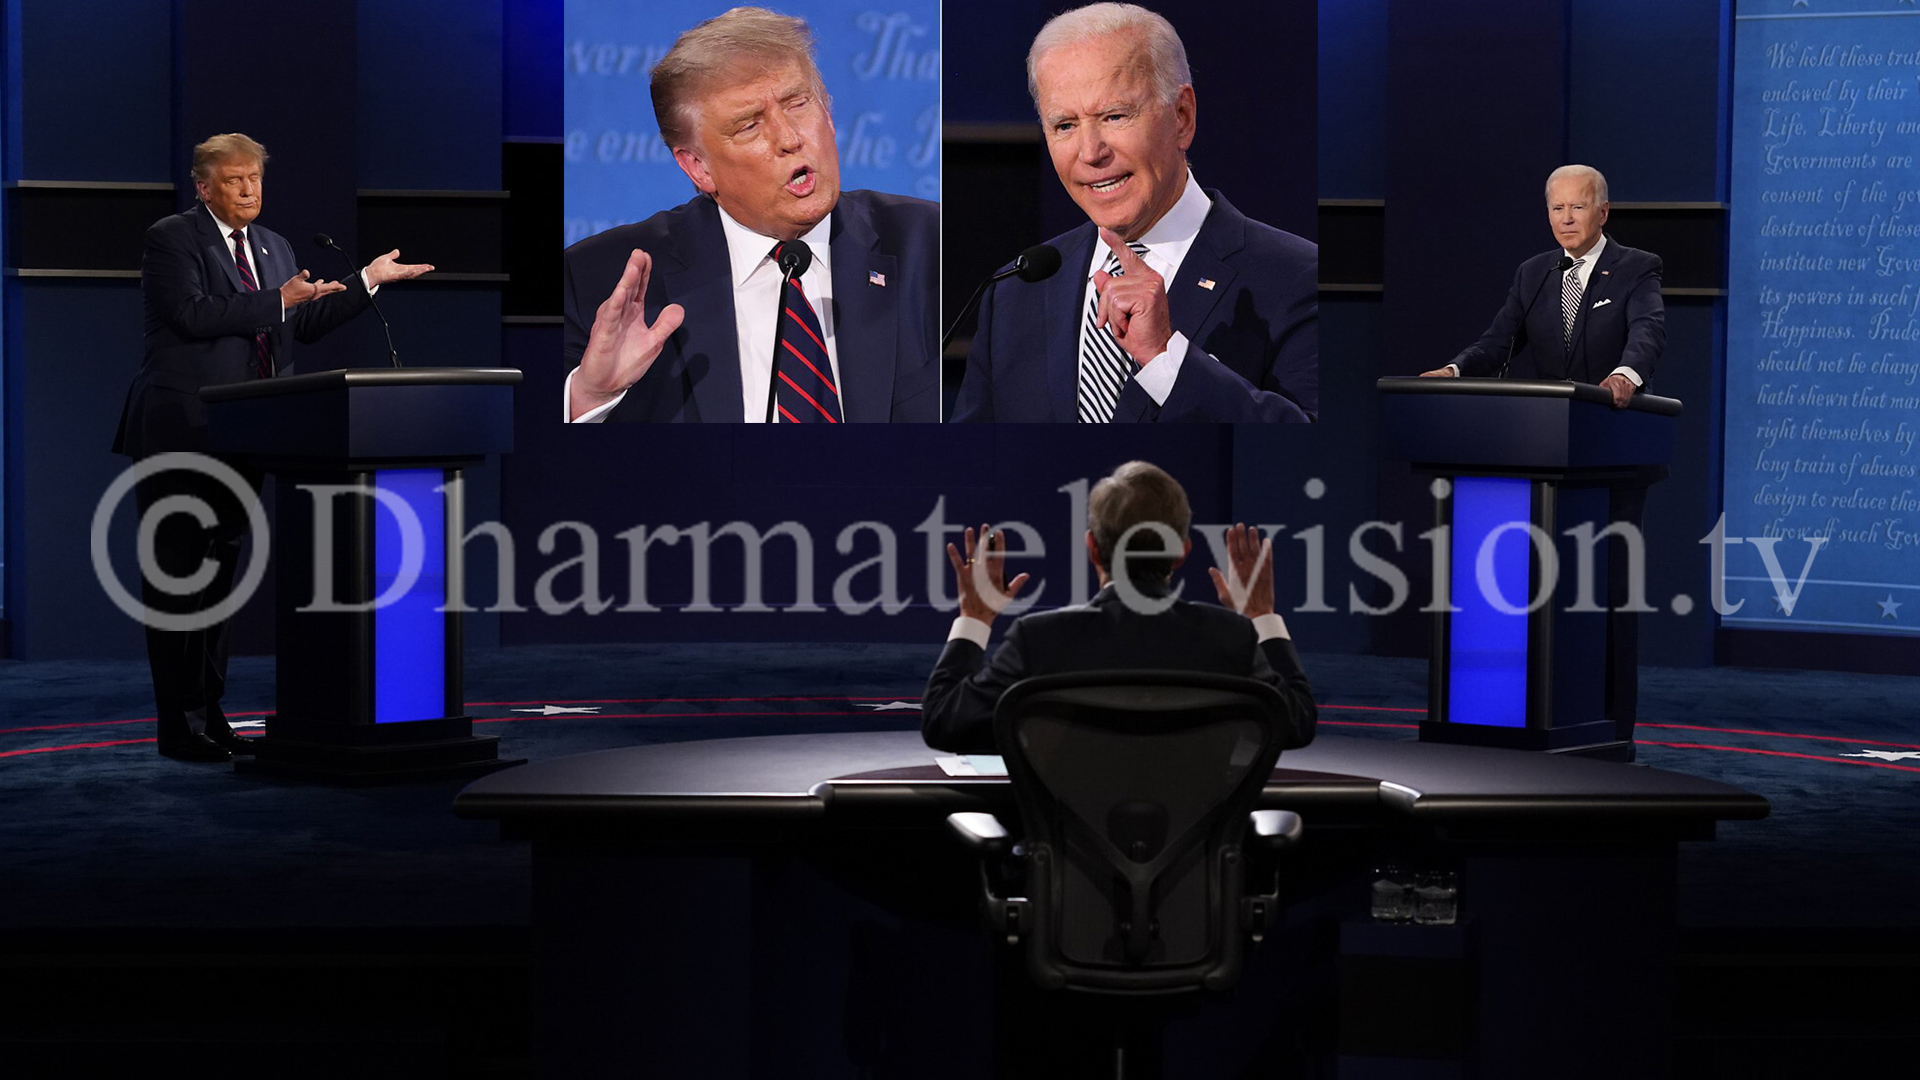 9 points lead for Biden after chaotic 1st presidential debate